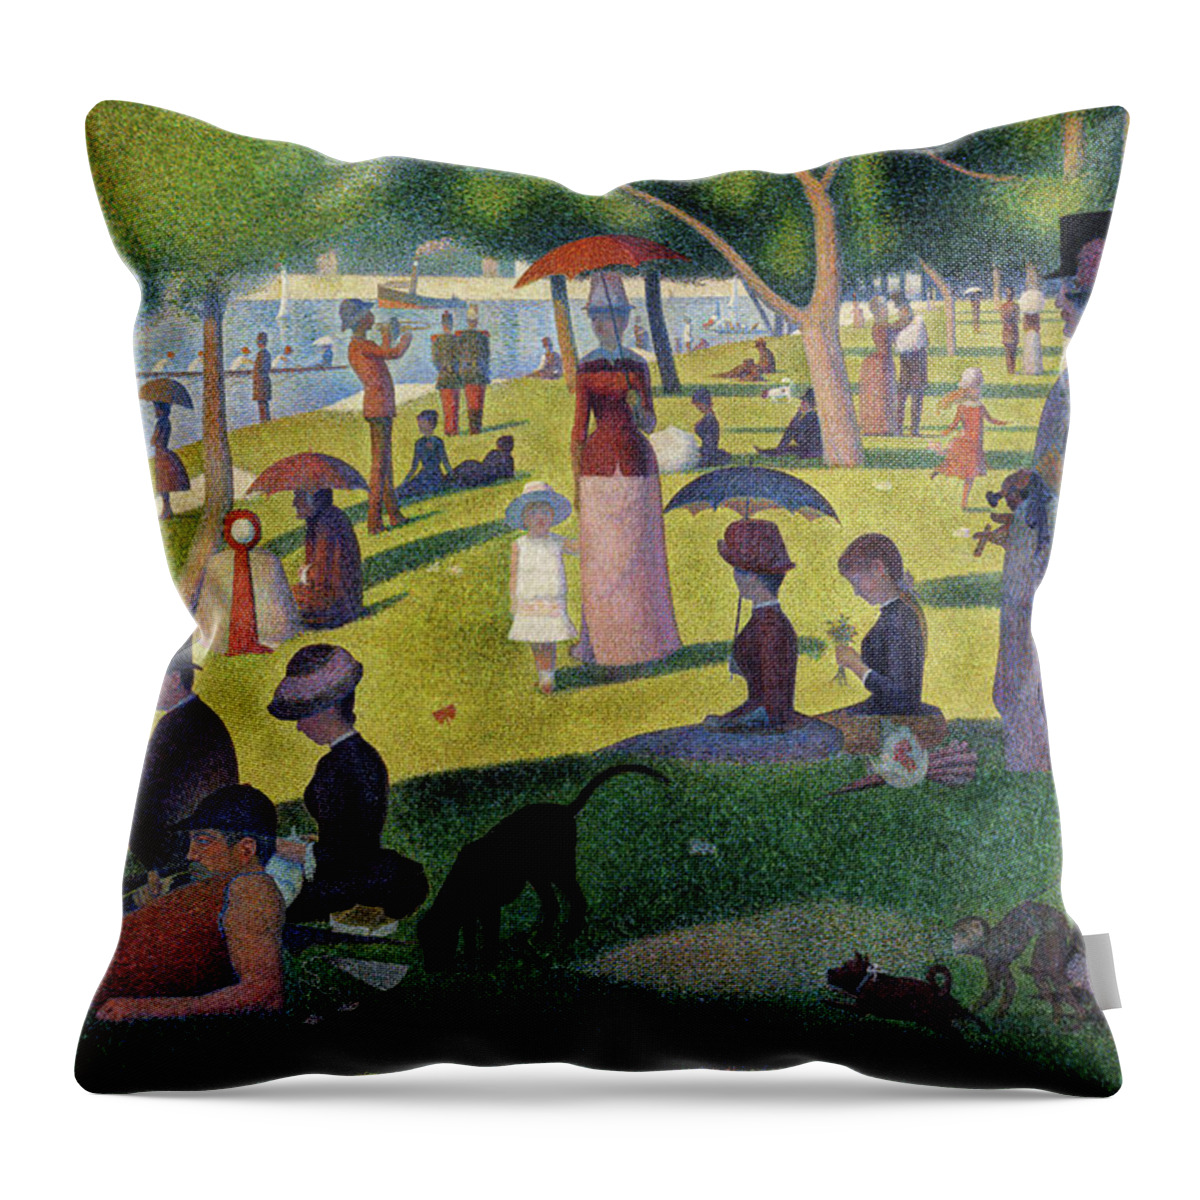 Vintage Images A Sunday Afternoon on the Island of La Grande Jatte Throw Pillow 16x16 Multicolor 